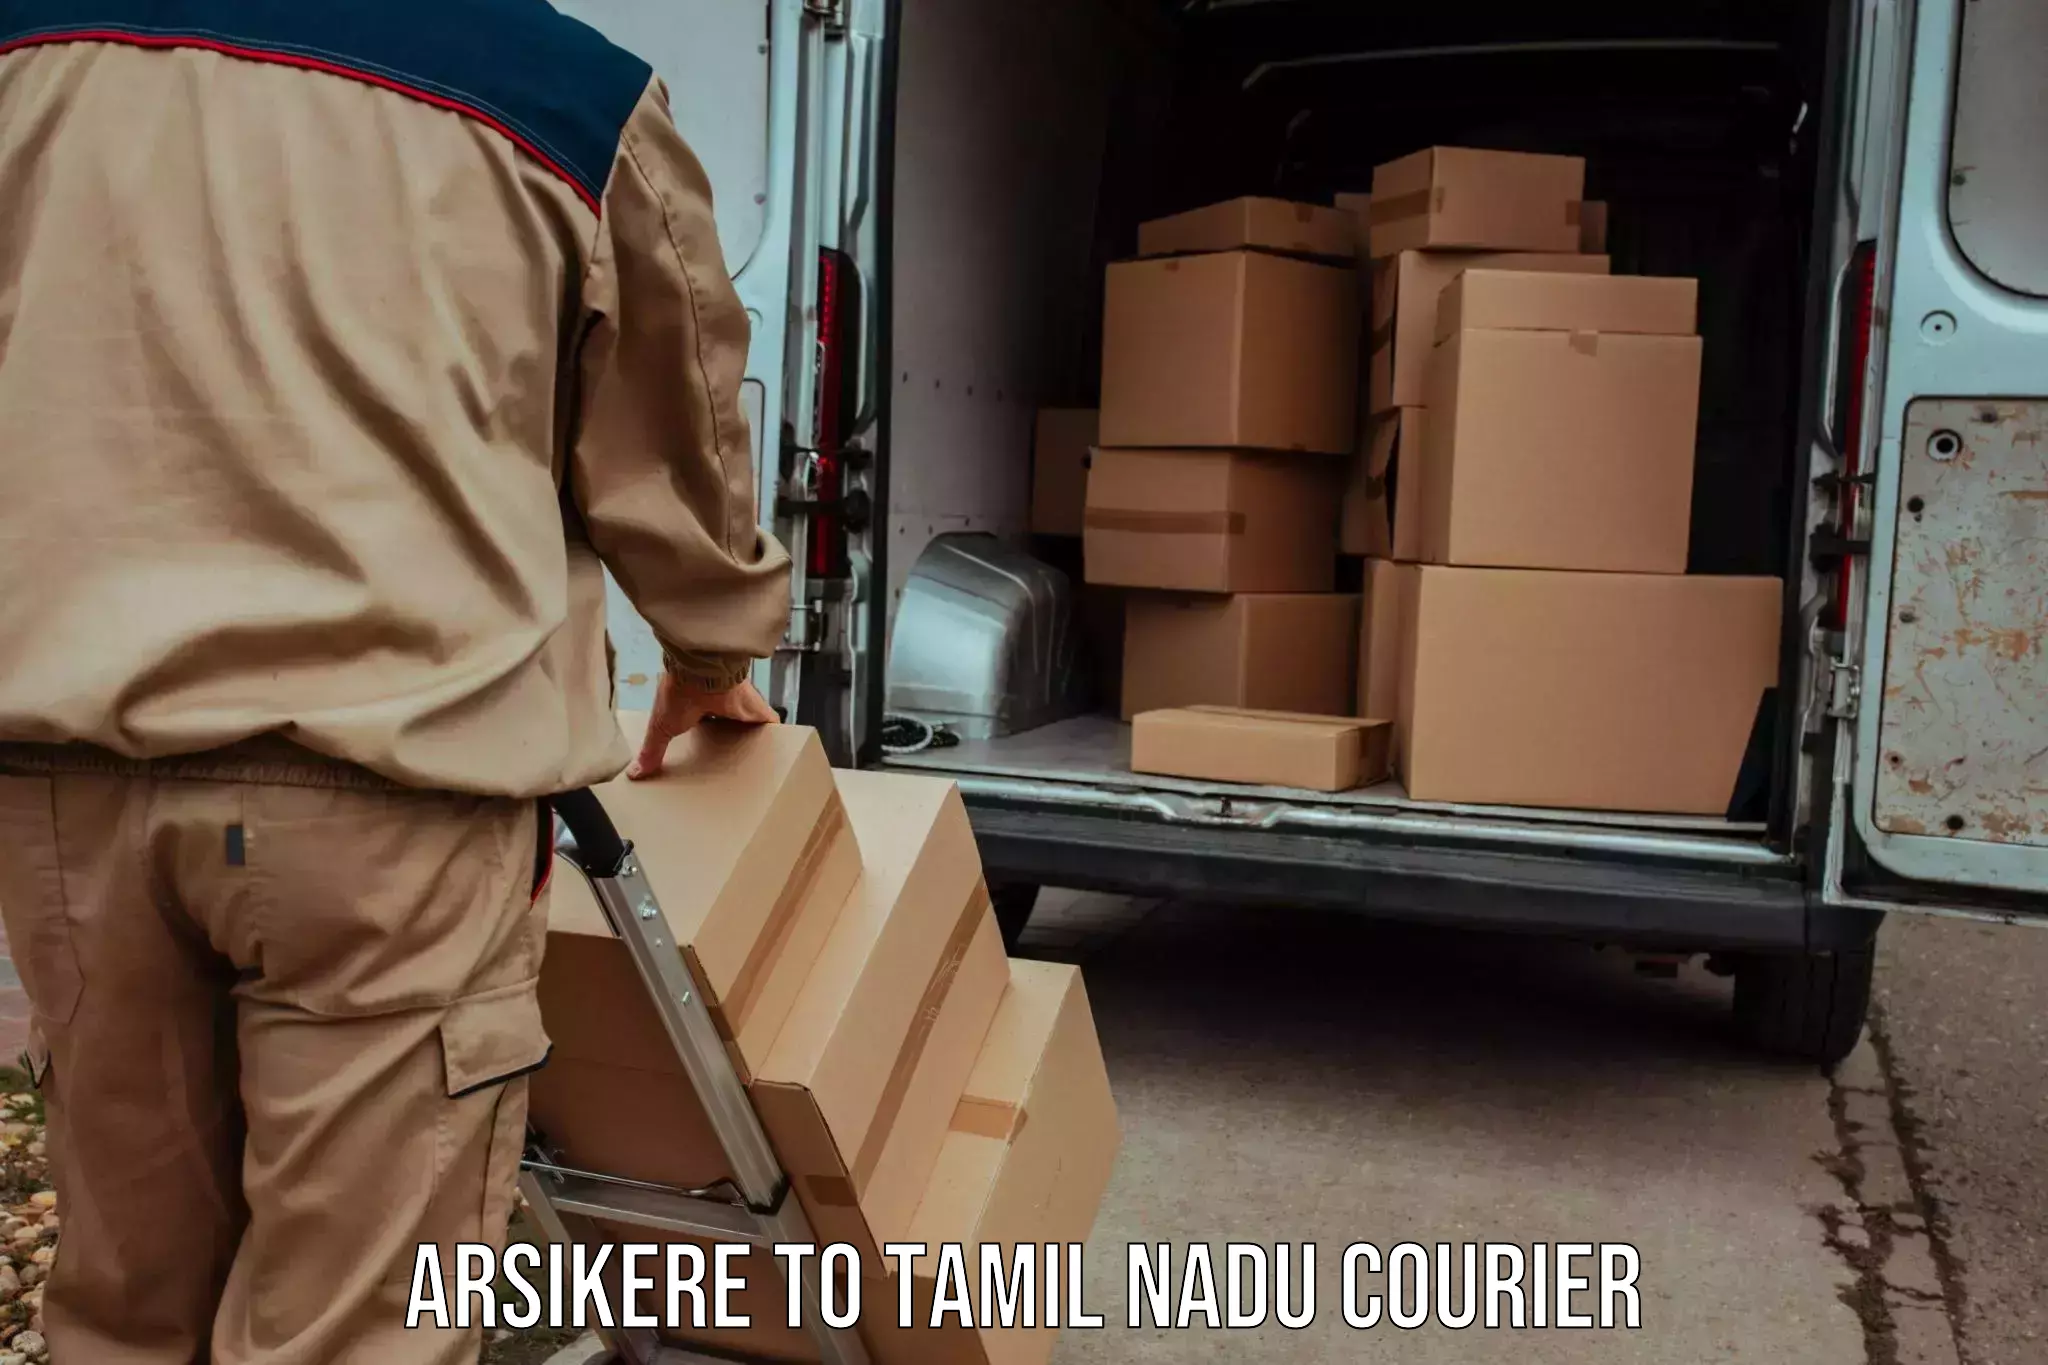 Full-service courier options Arsikere to Nagapattinam